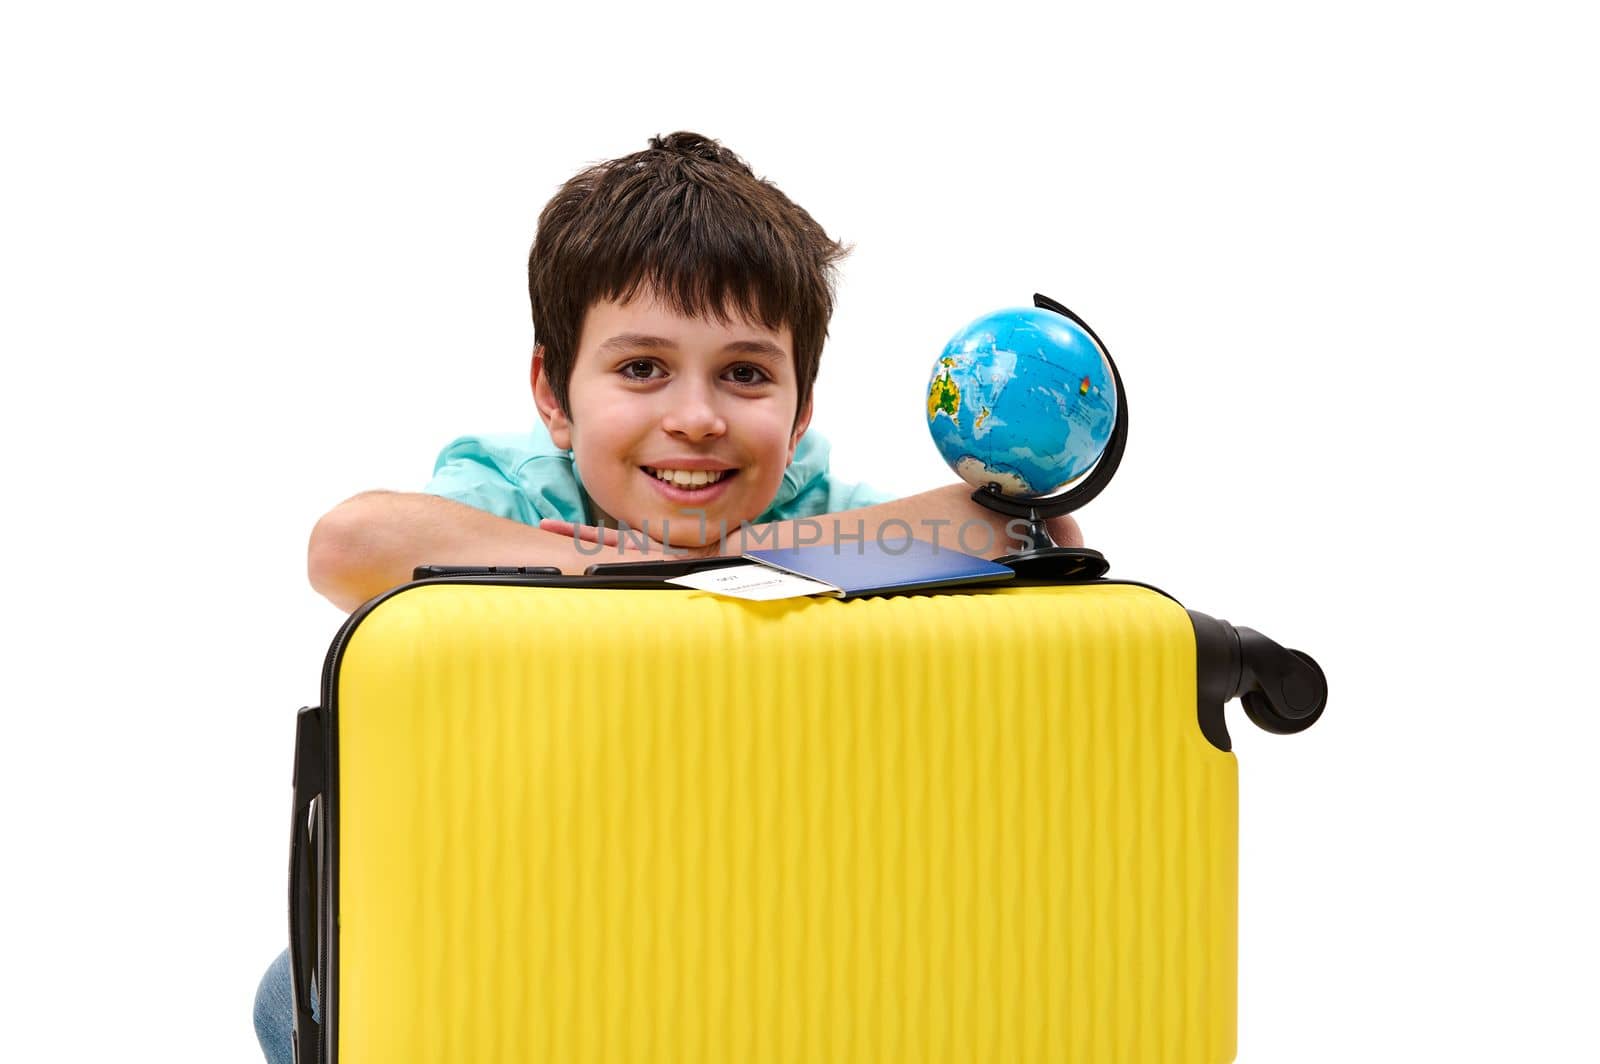 Caucasian teenage boy - traveler, passenger with yellow suitcase, boarding pass and globe, smiling looking at camera by artgf